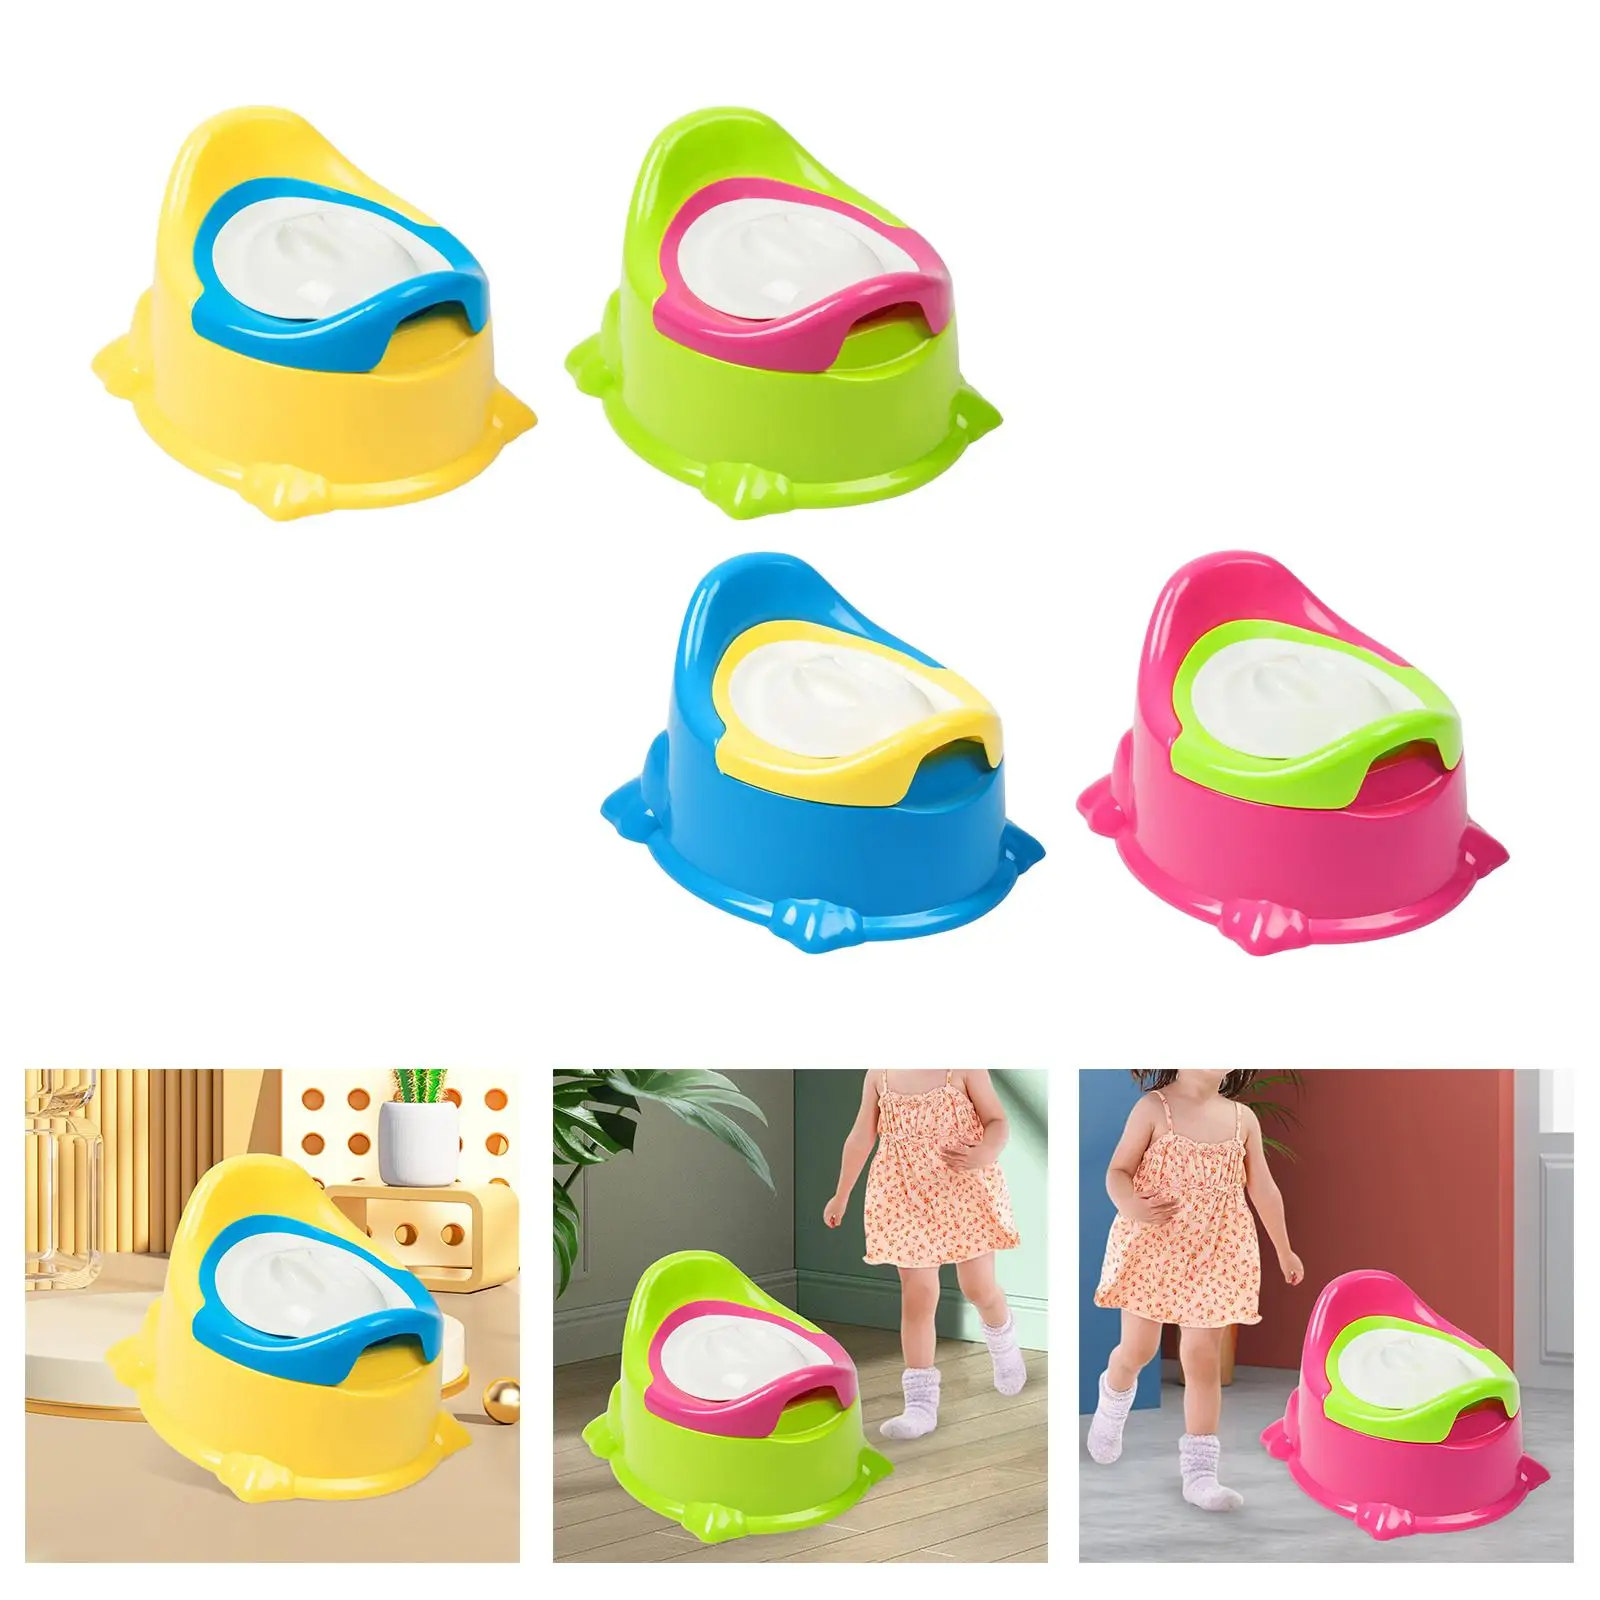 Childrens Potty Kids Toilet Seat Non Slip with Handle Baby Potty Trainer Toilet Chair Seat for Babies 6-12 Month Bedroom Home